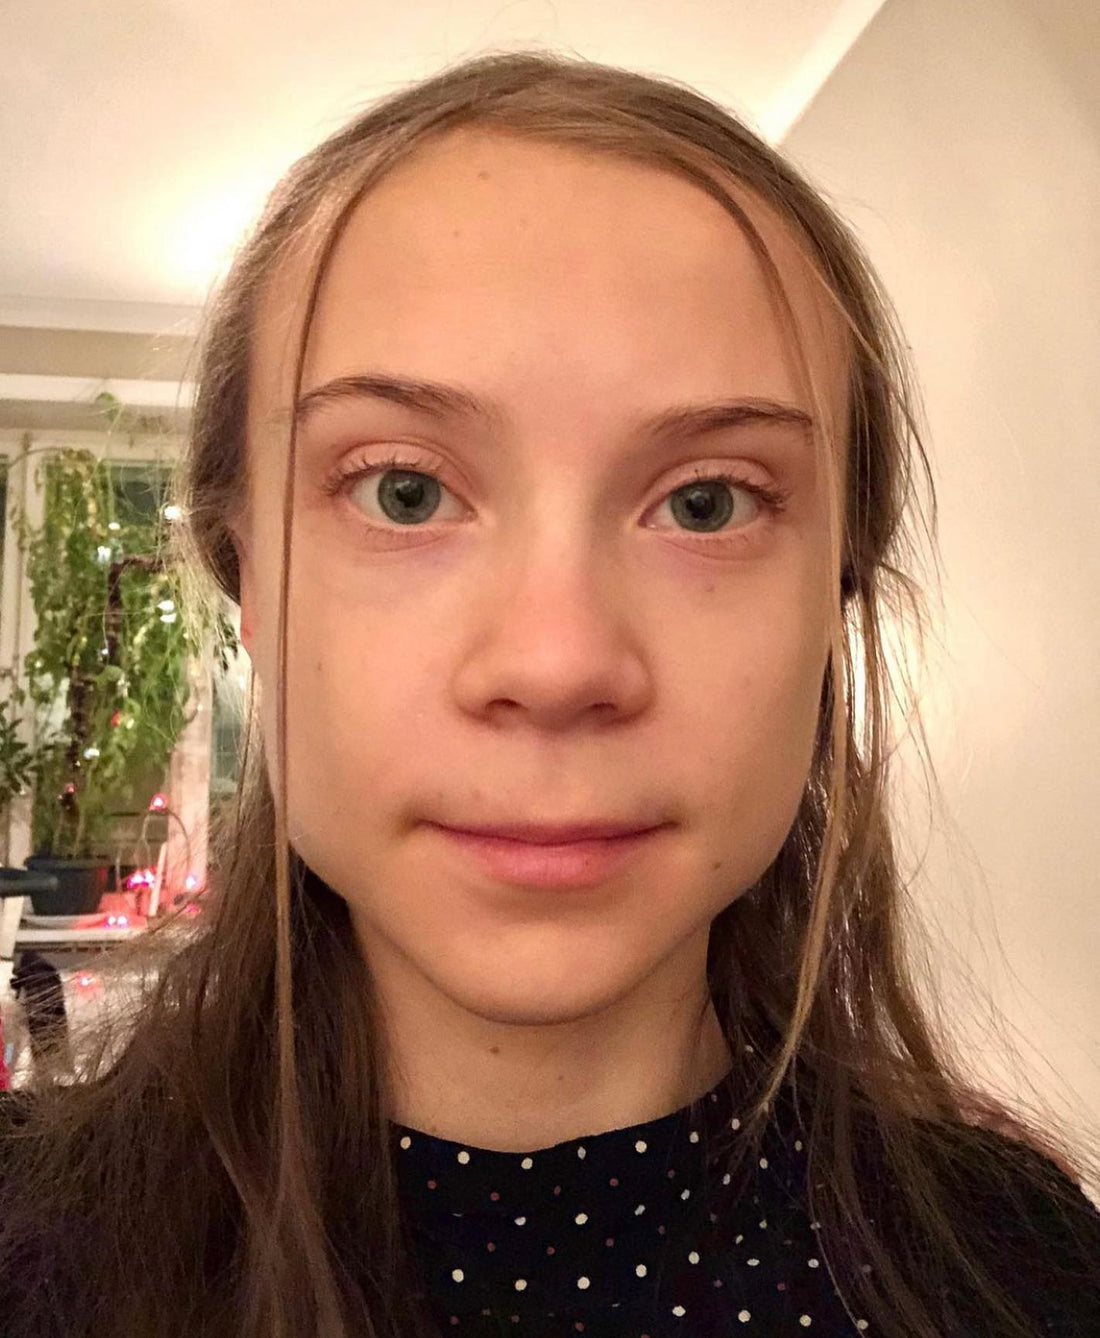 Greta Thunberg discussing being Autistic on Autism Awareness Day, posted by Outshine Labels Blog